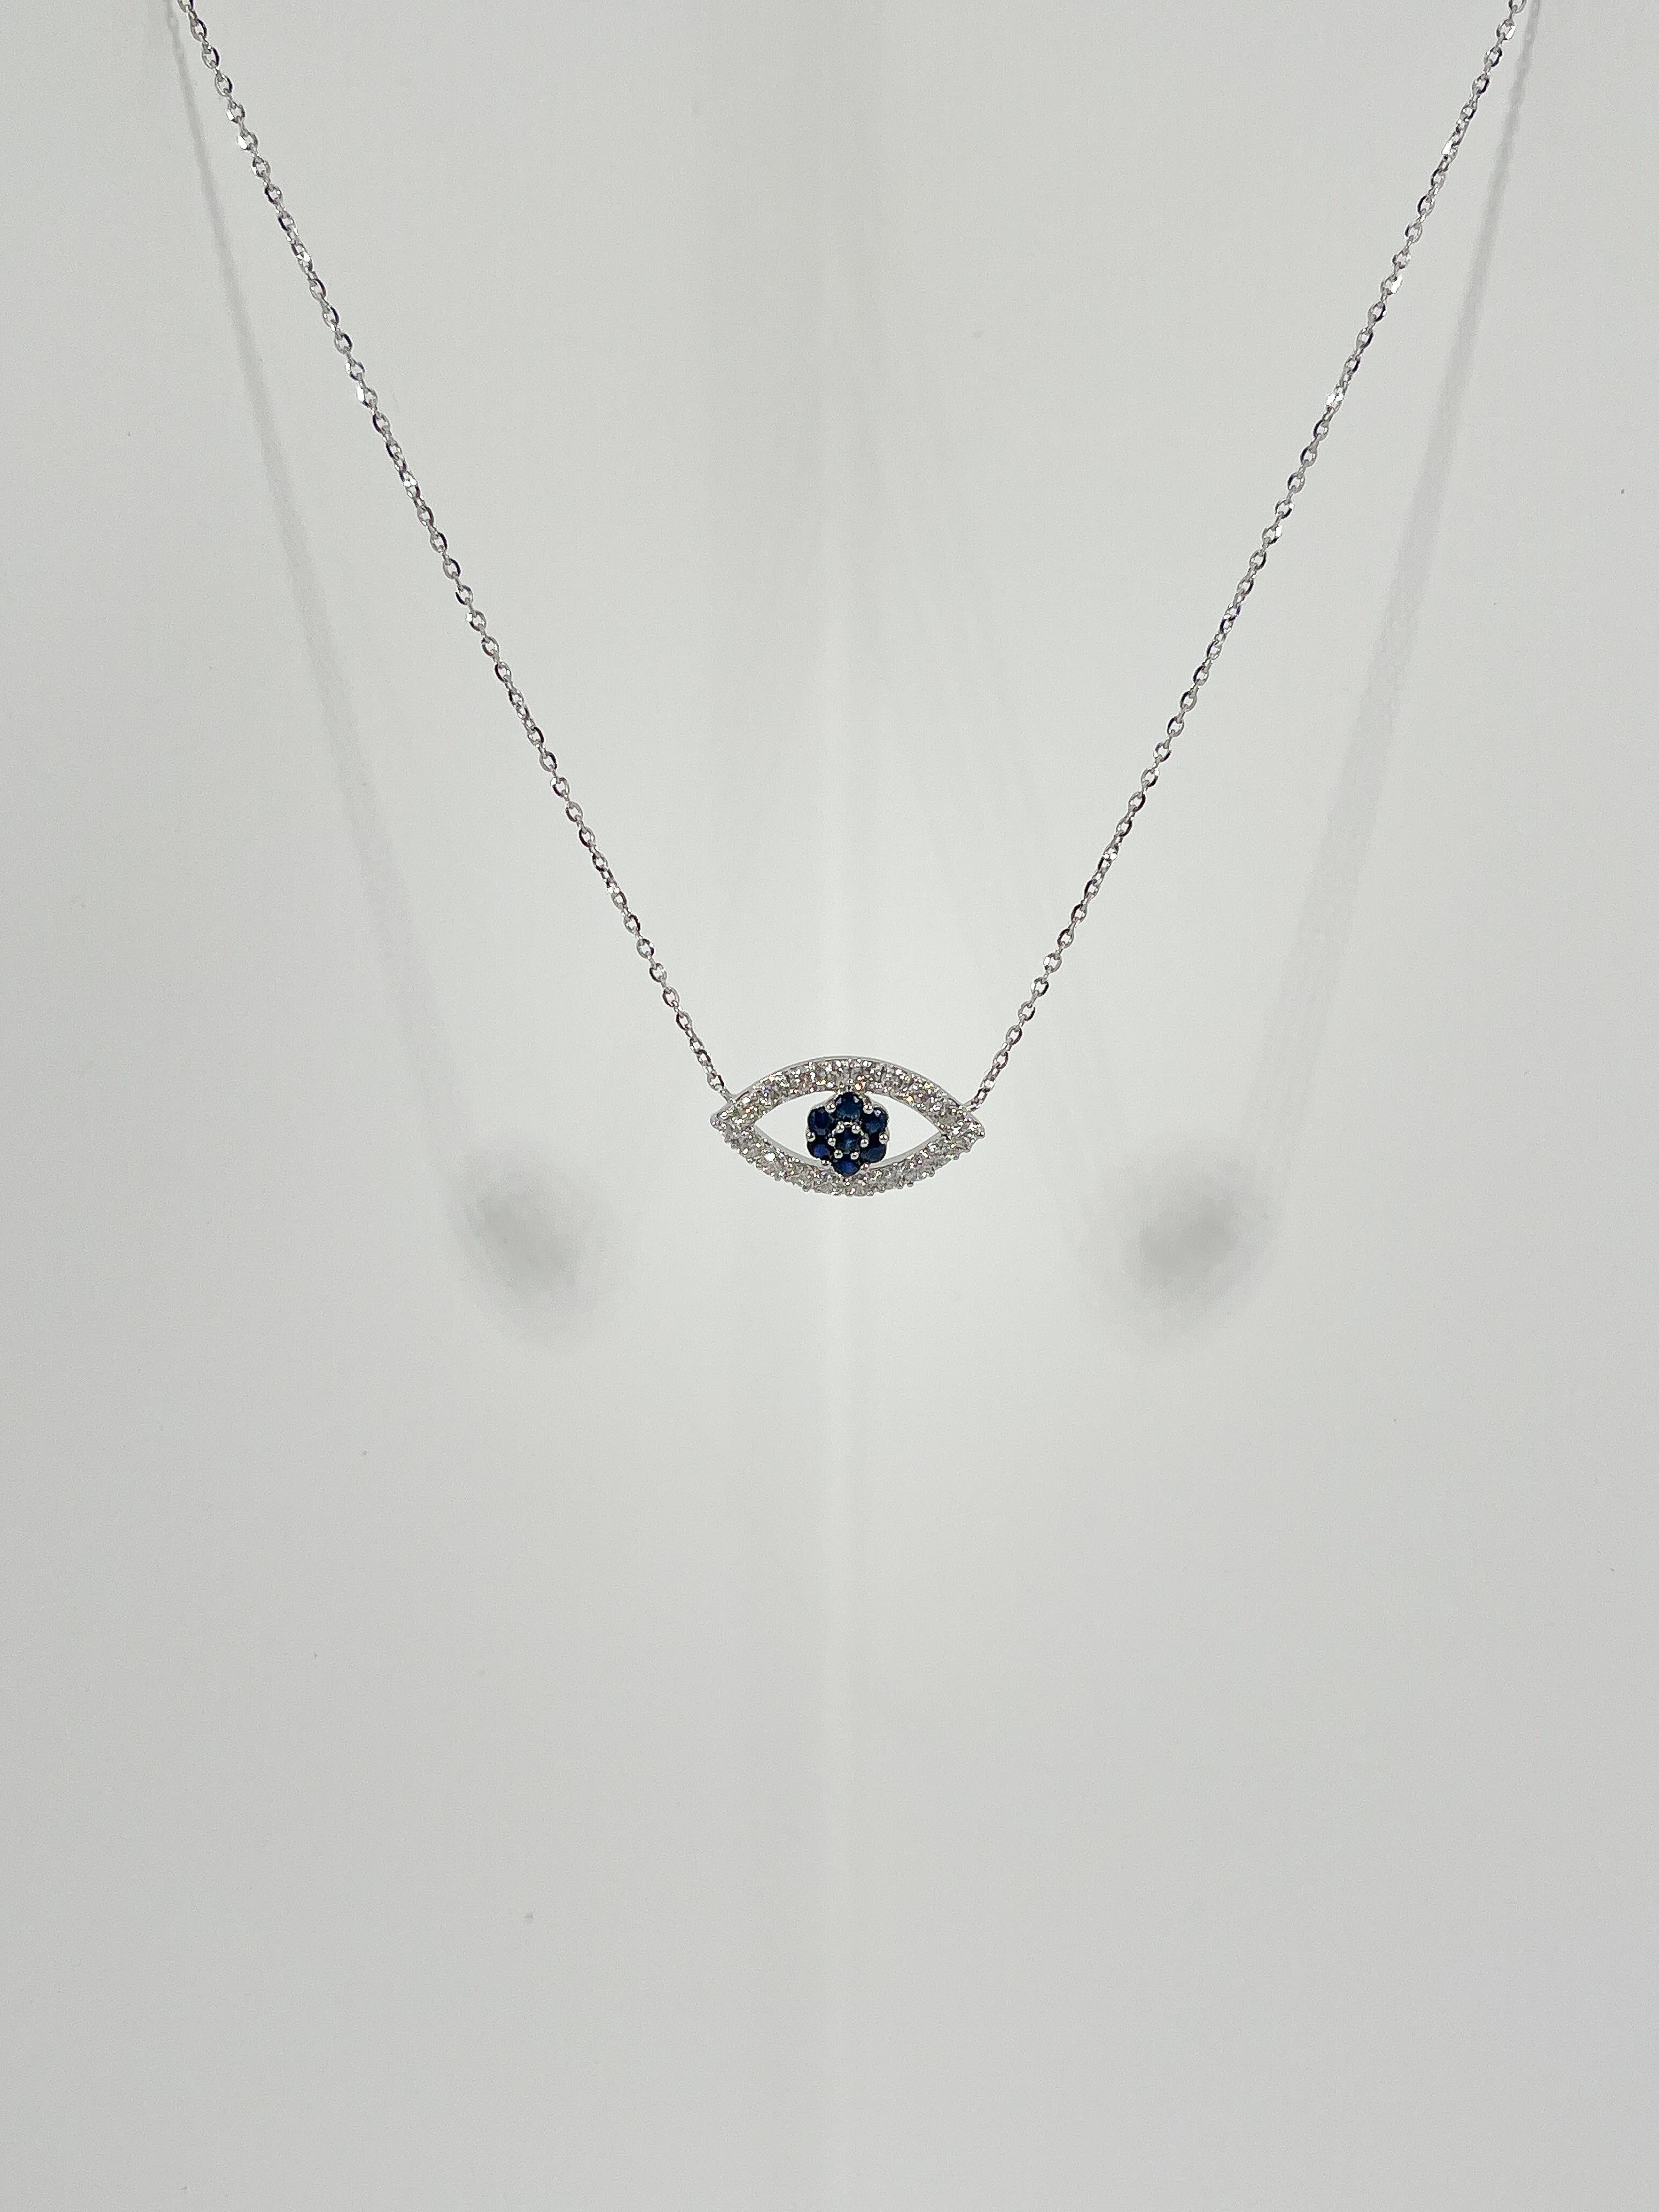 18k white gold diamond .50 CTW and sapphire .24 CTW evil eye pendant necklace. The necklace is 18 inches long, pendant has diamonds on the outside of the eye and sapphires as the iris. Pendant measures 9 x 16.6 mm and necklace has a total weight of